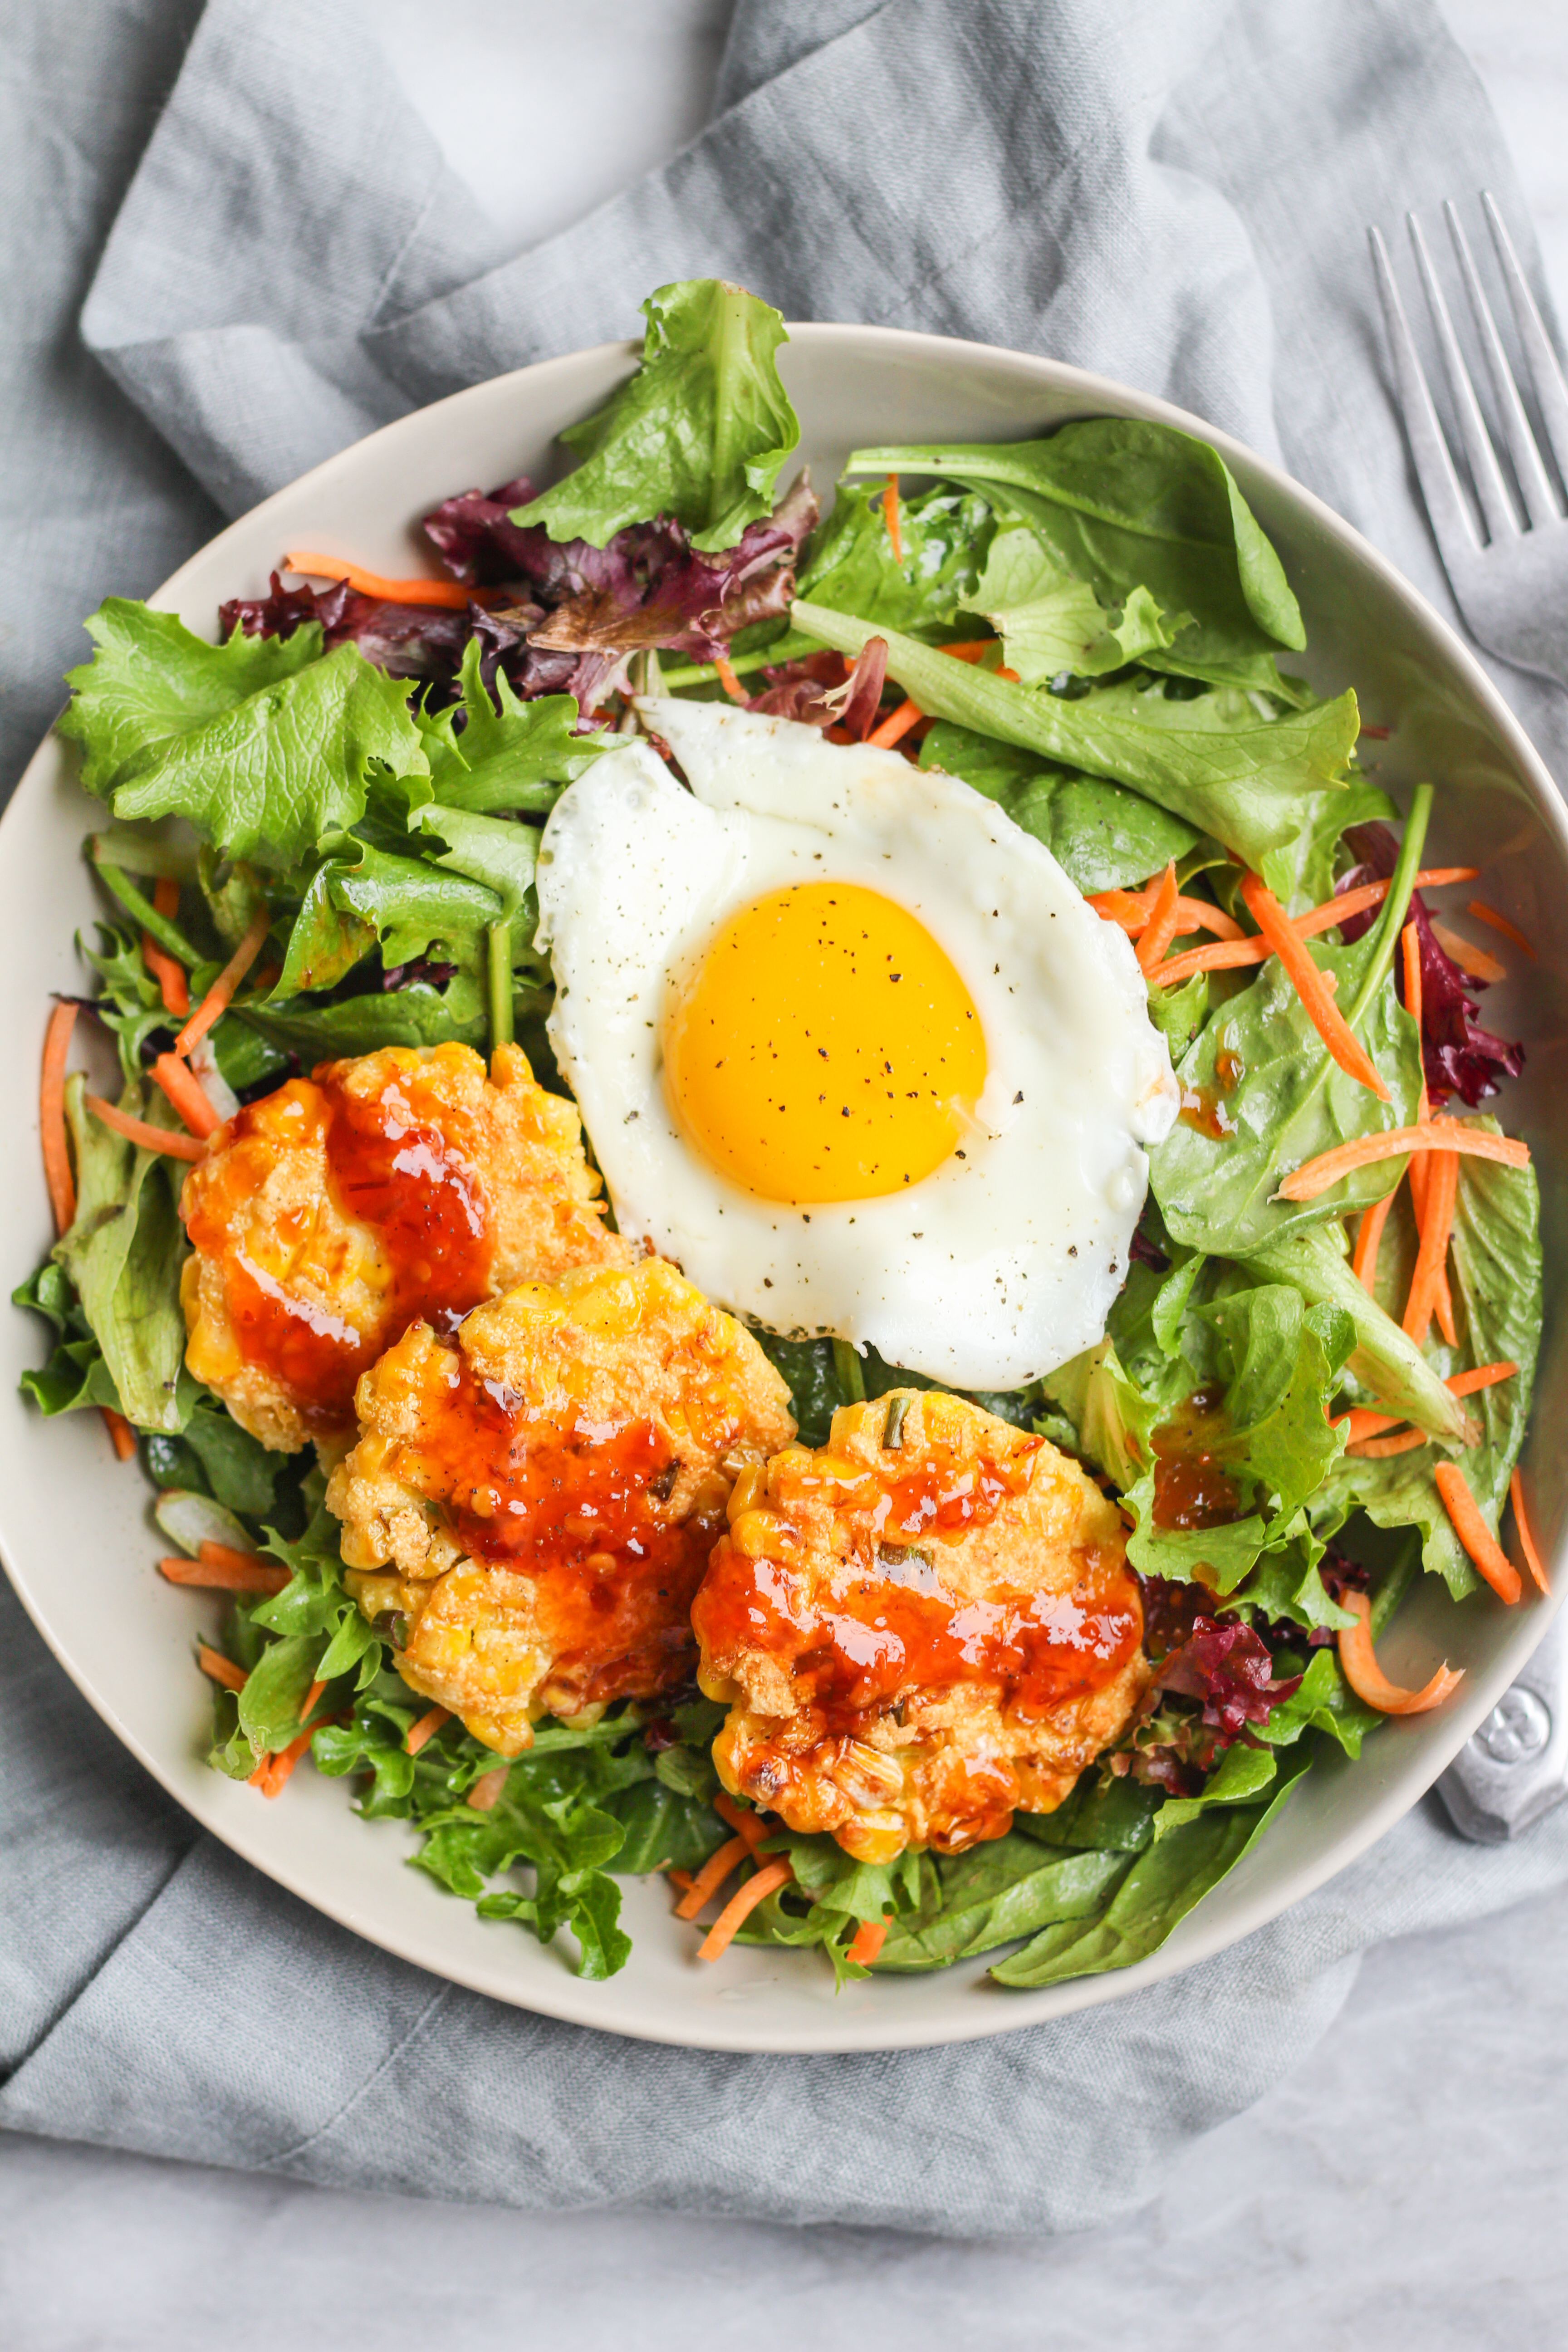 Corn Fritters with Spring Greens, Fried Egg & Sweet Chili Sauce